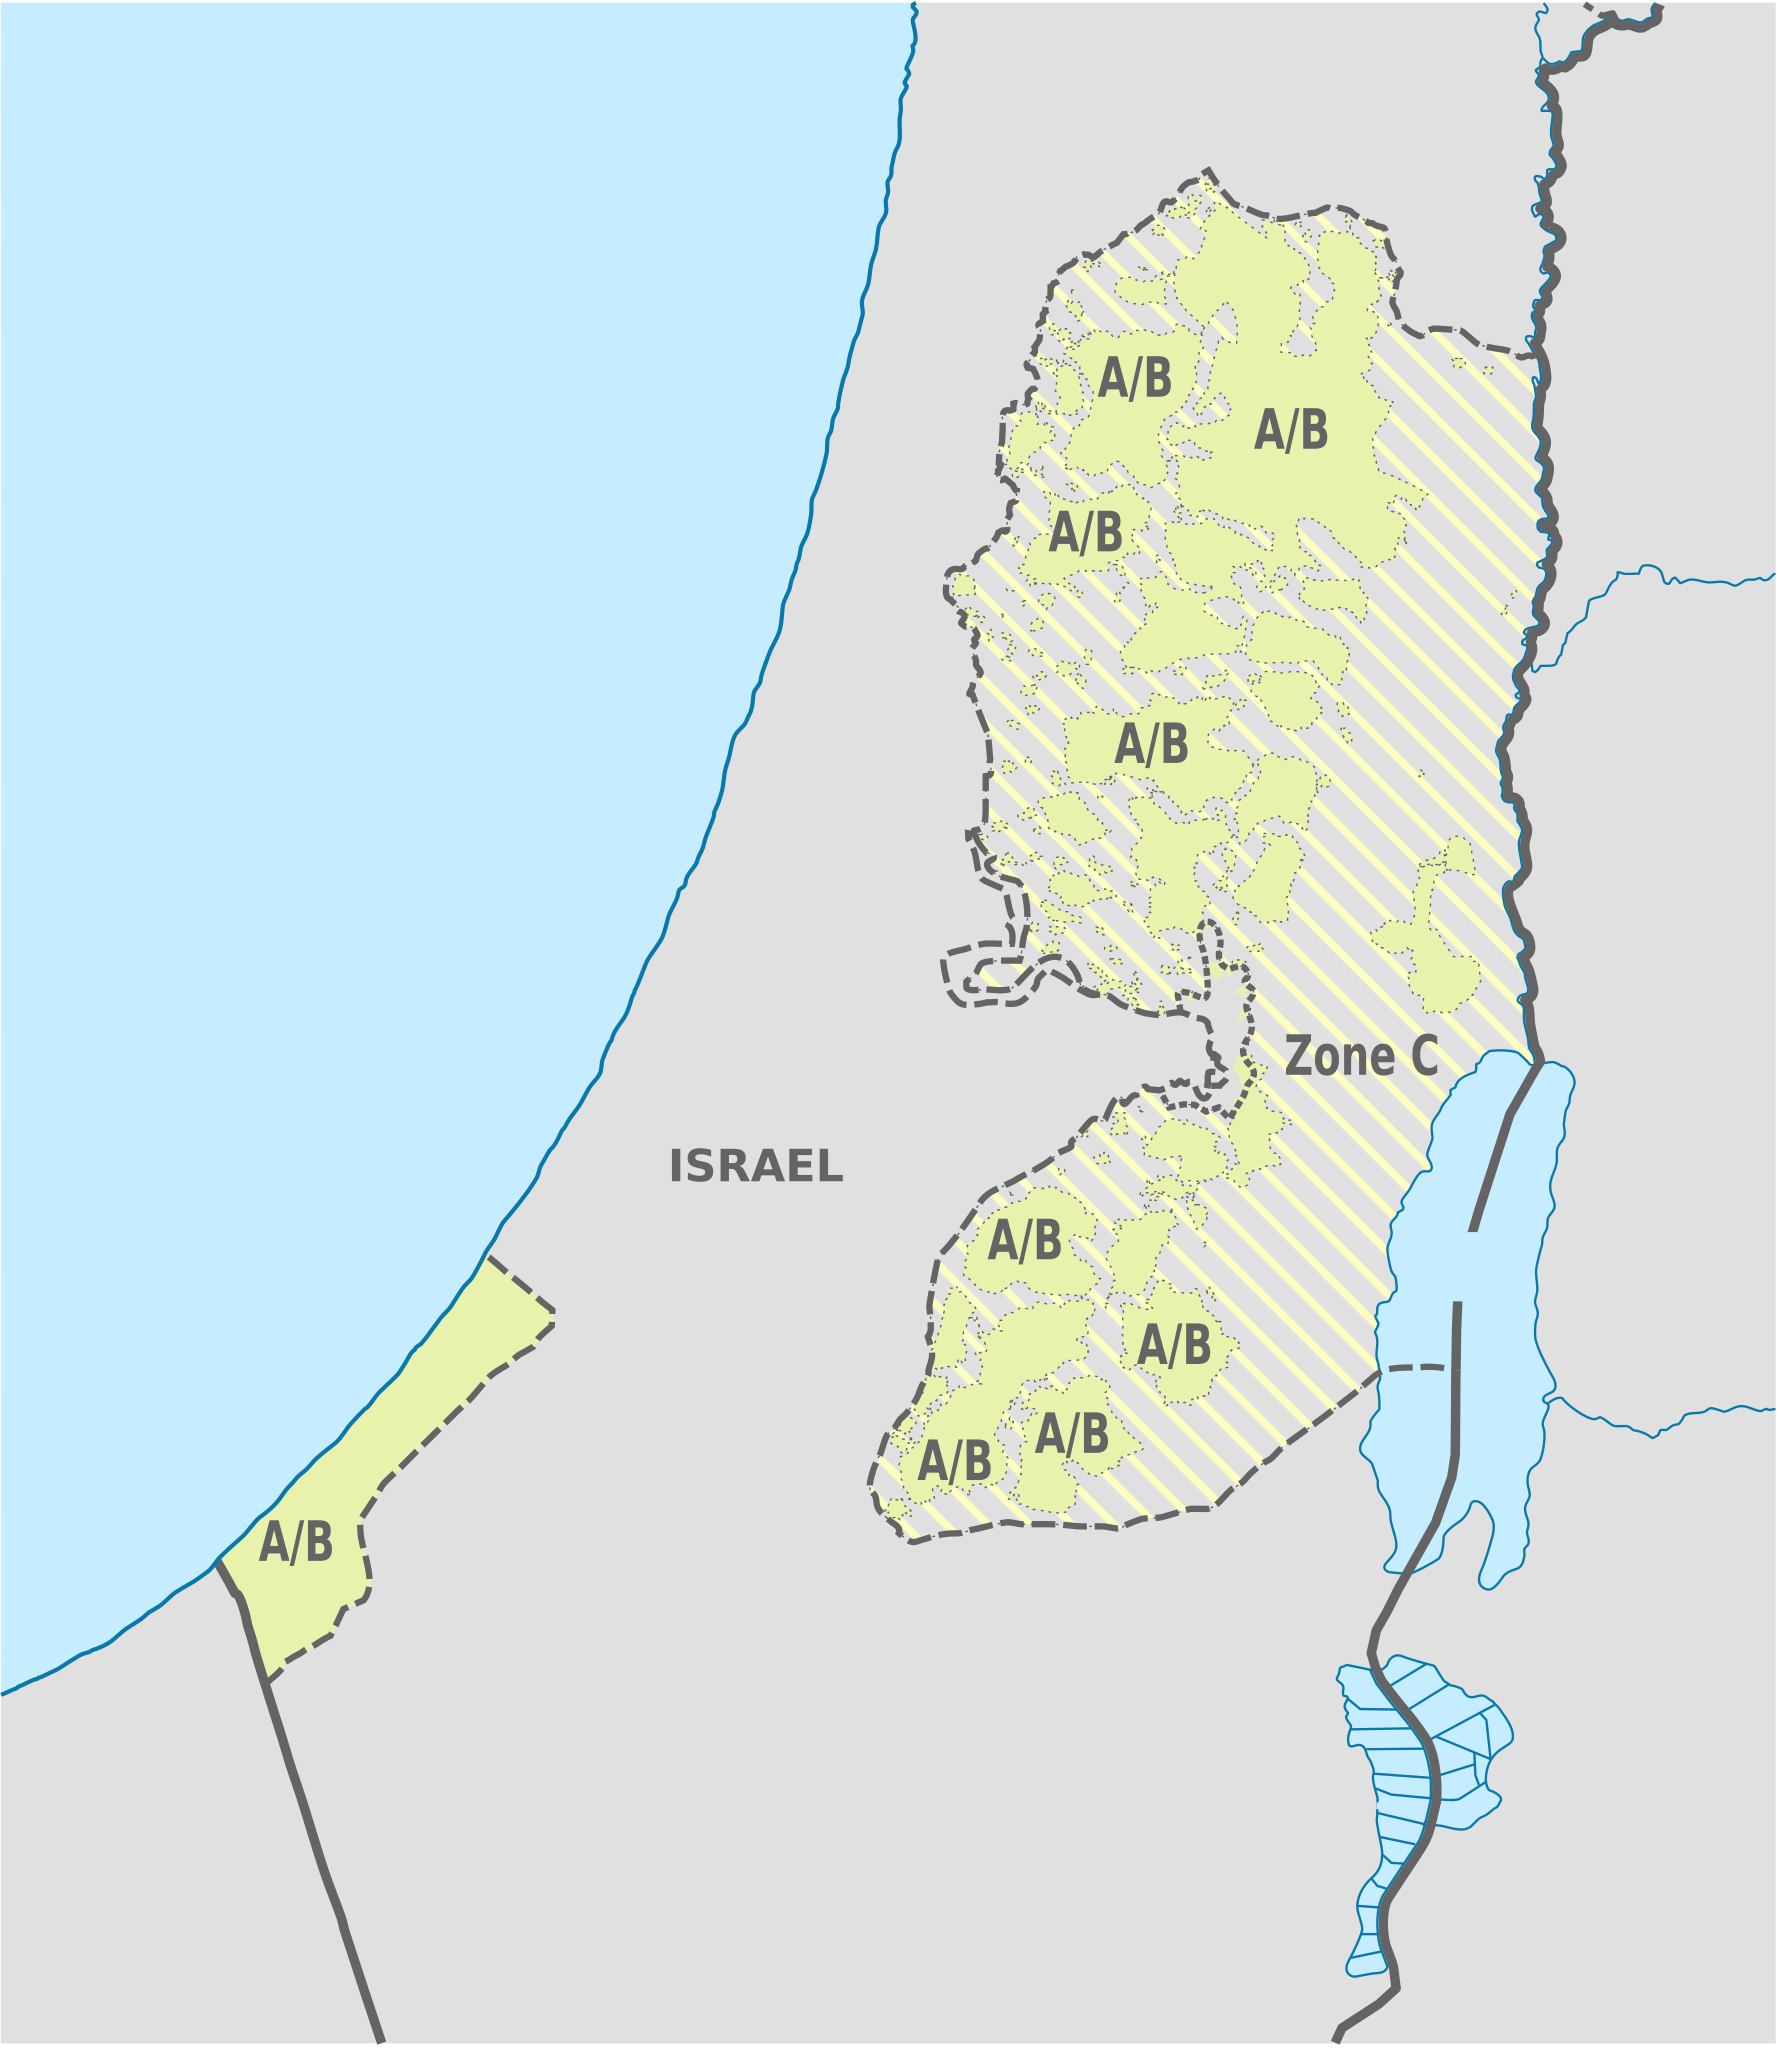 West Bank Image TUBS Wikimedia Commons